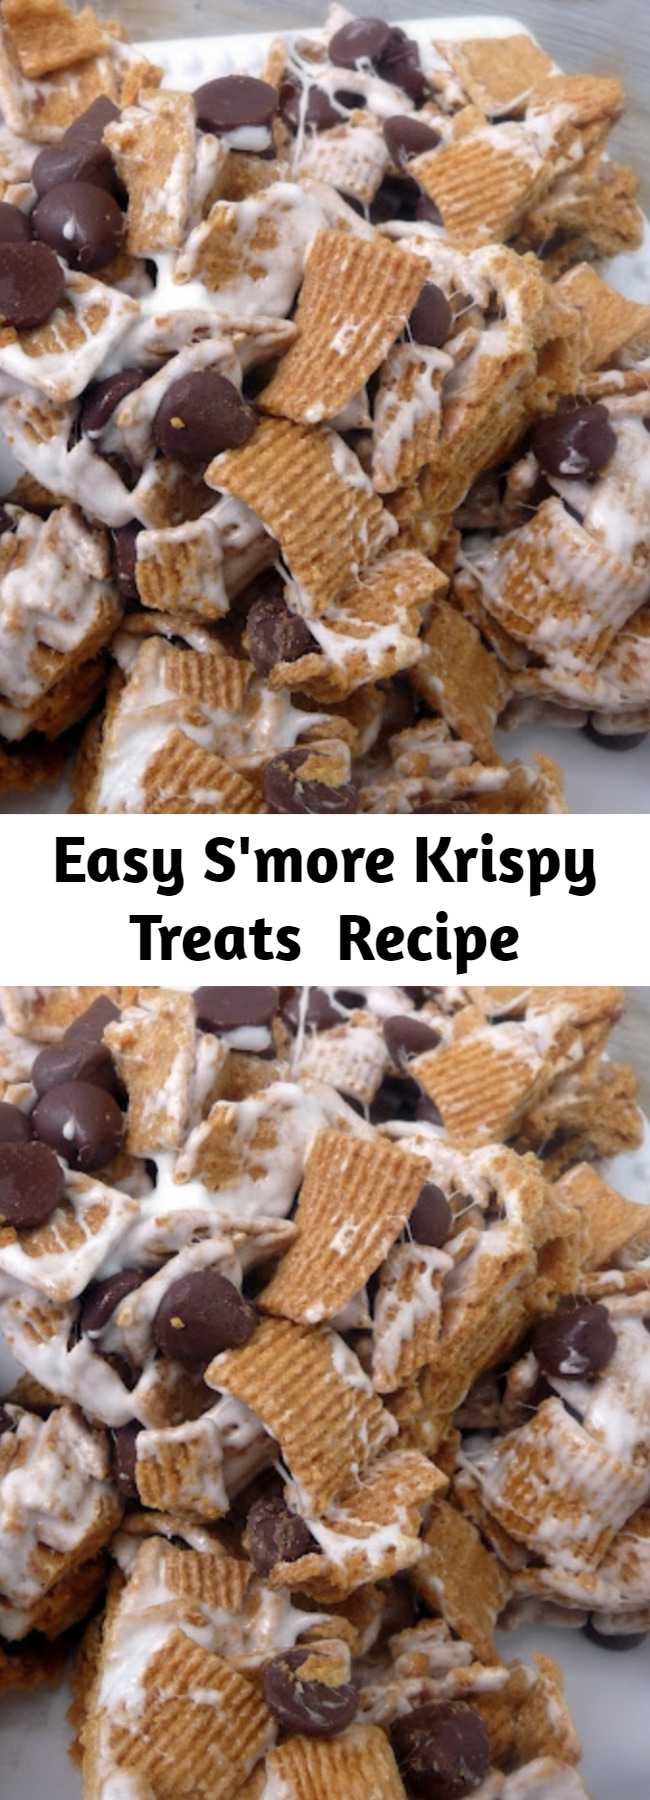 Easy S'more Krispy Treats  Recipe - These S'mores bars are incredible! So easy to make and completely delicious! These are SO freaking good!!